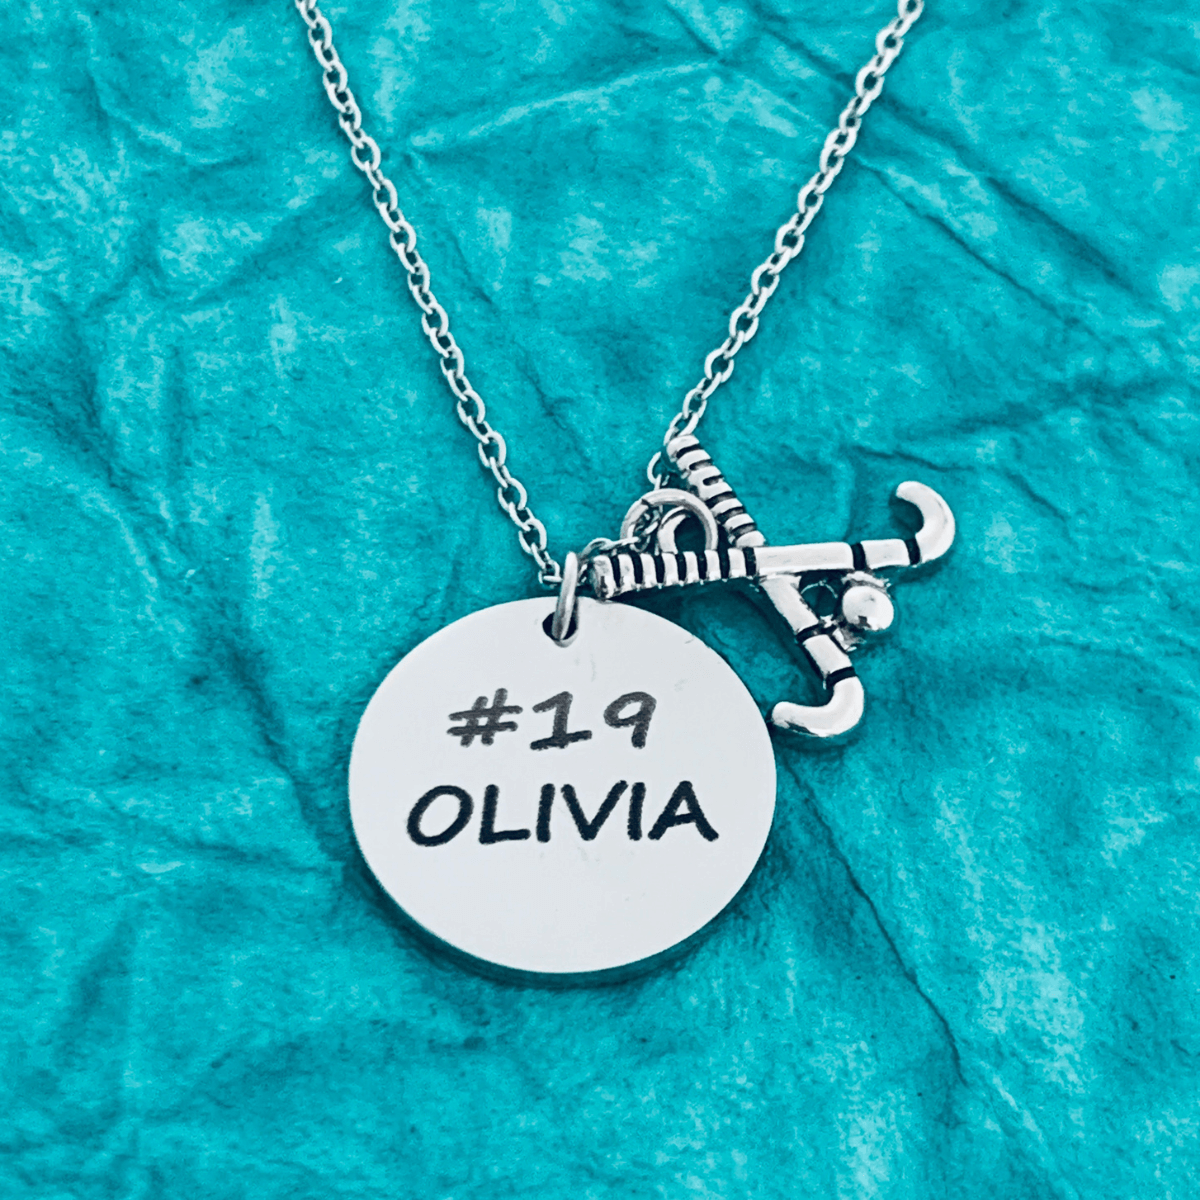 Engraved field hockey necklace